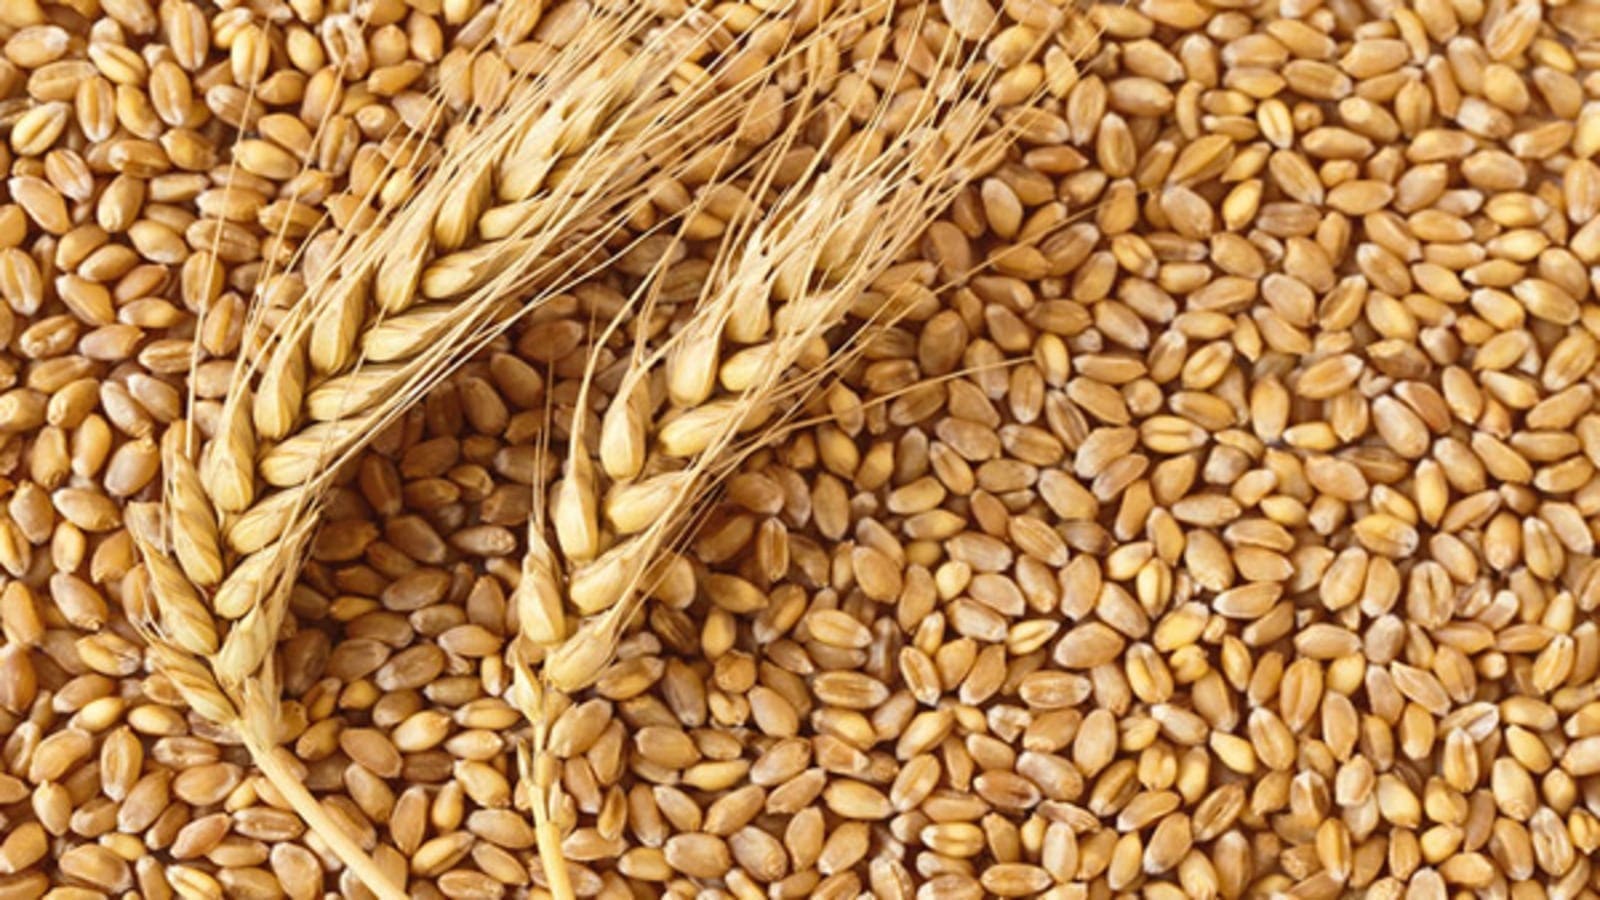 Ethiopia to continue relying on wheat imports as demand overshadows local production